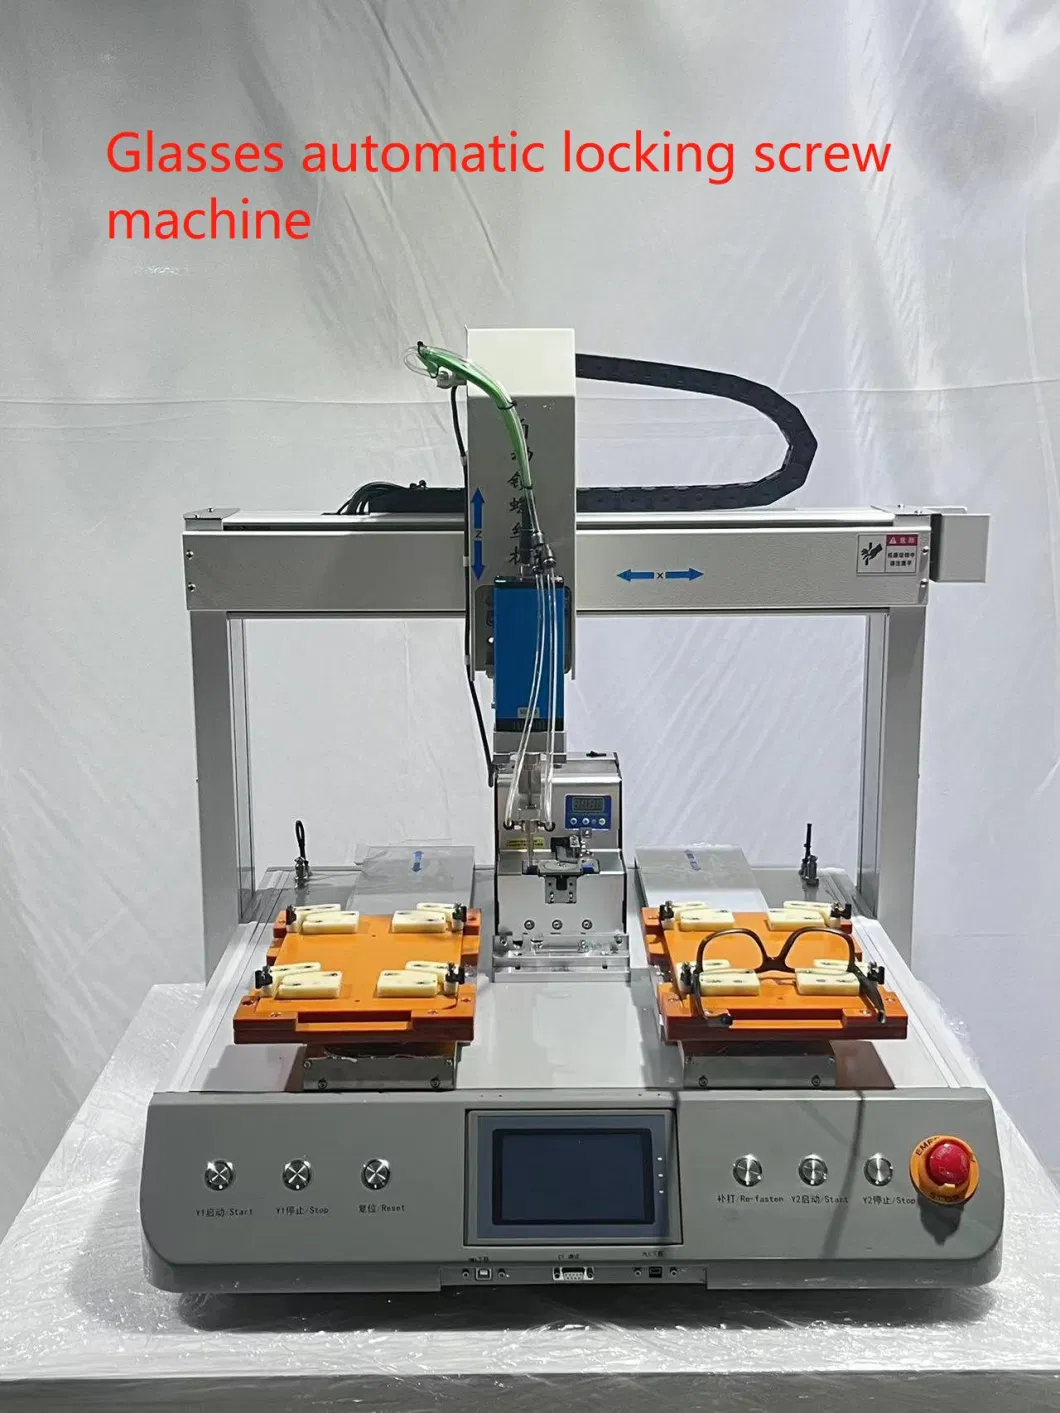 Ra Rapid Prototyping Automatic Leg Bending Machine Is Used for Bending Glasses Frame Arms PC/Sheet/Tr Material/Plastic Steel